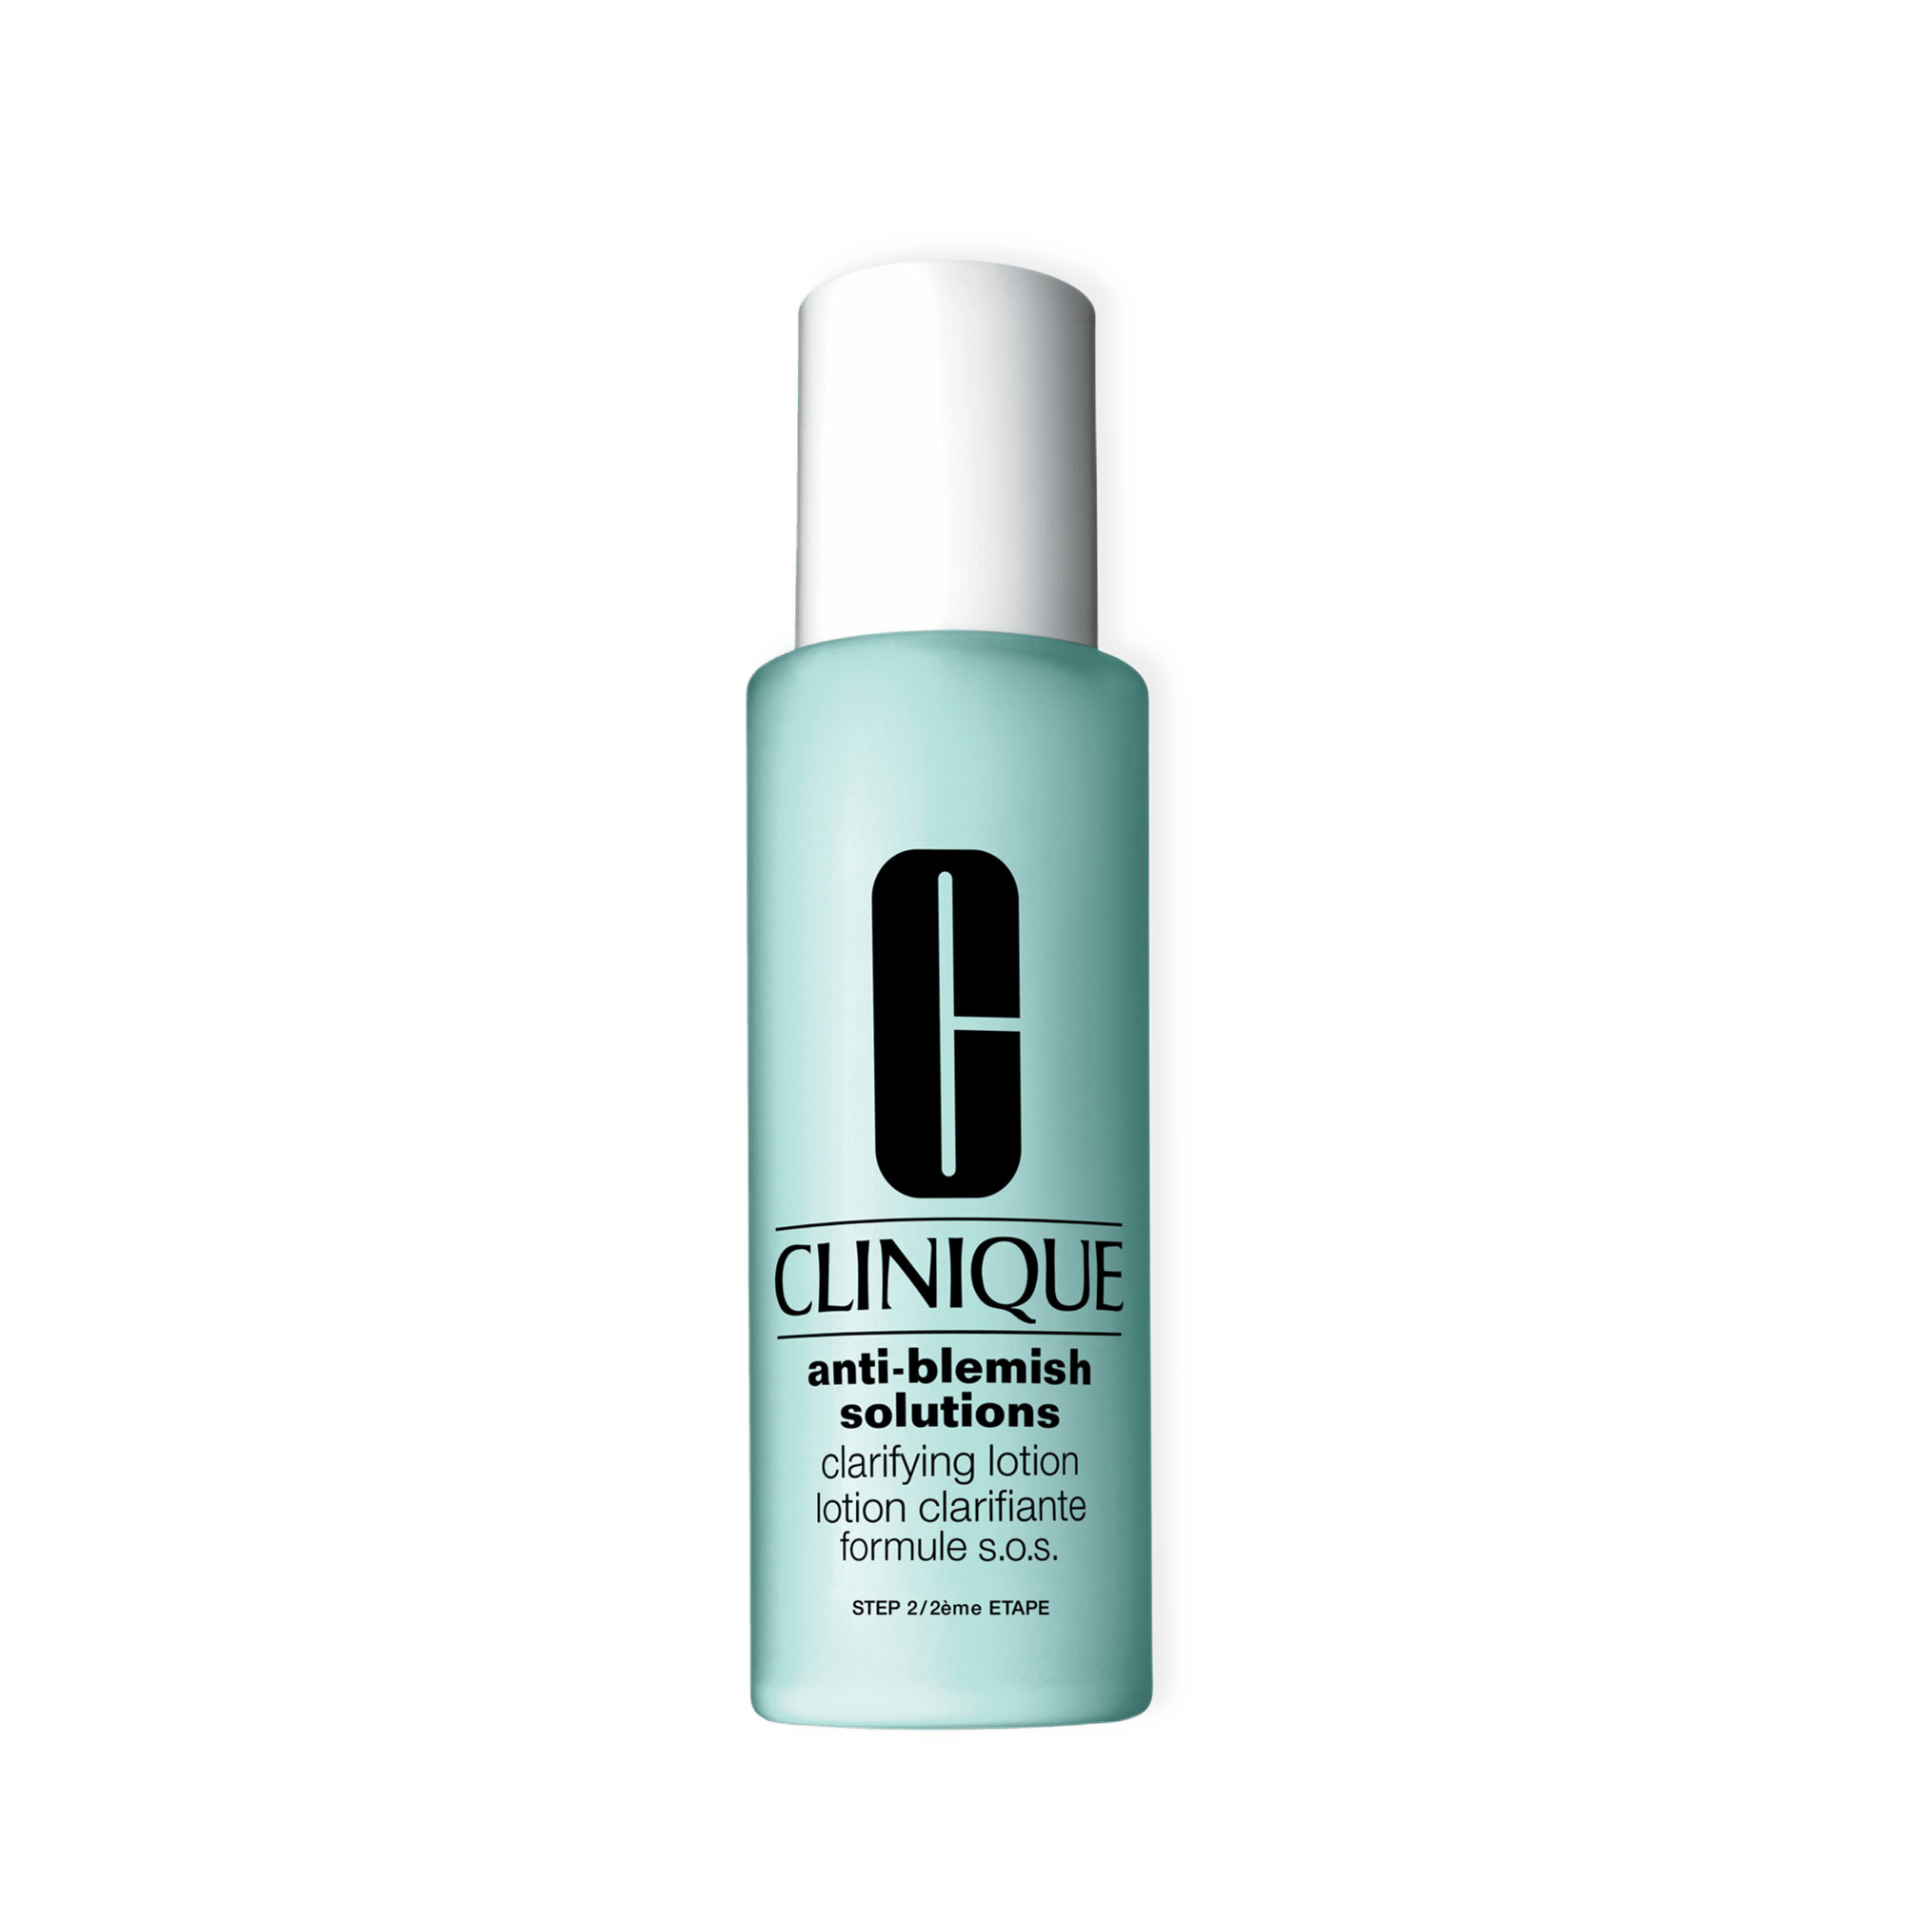 Anti-Blemish Solutions Clarifying Lotion från Clinique